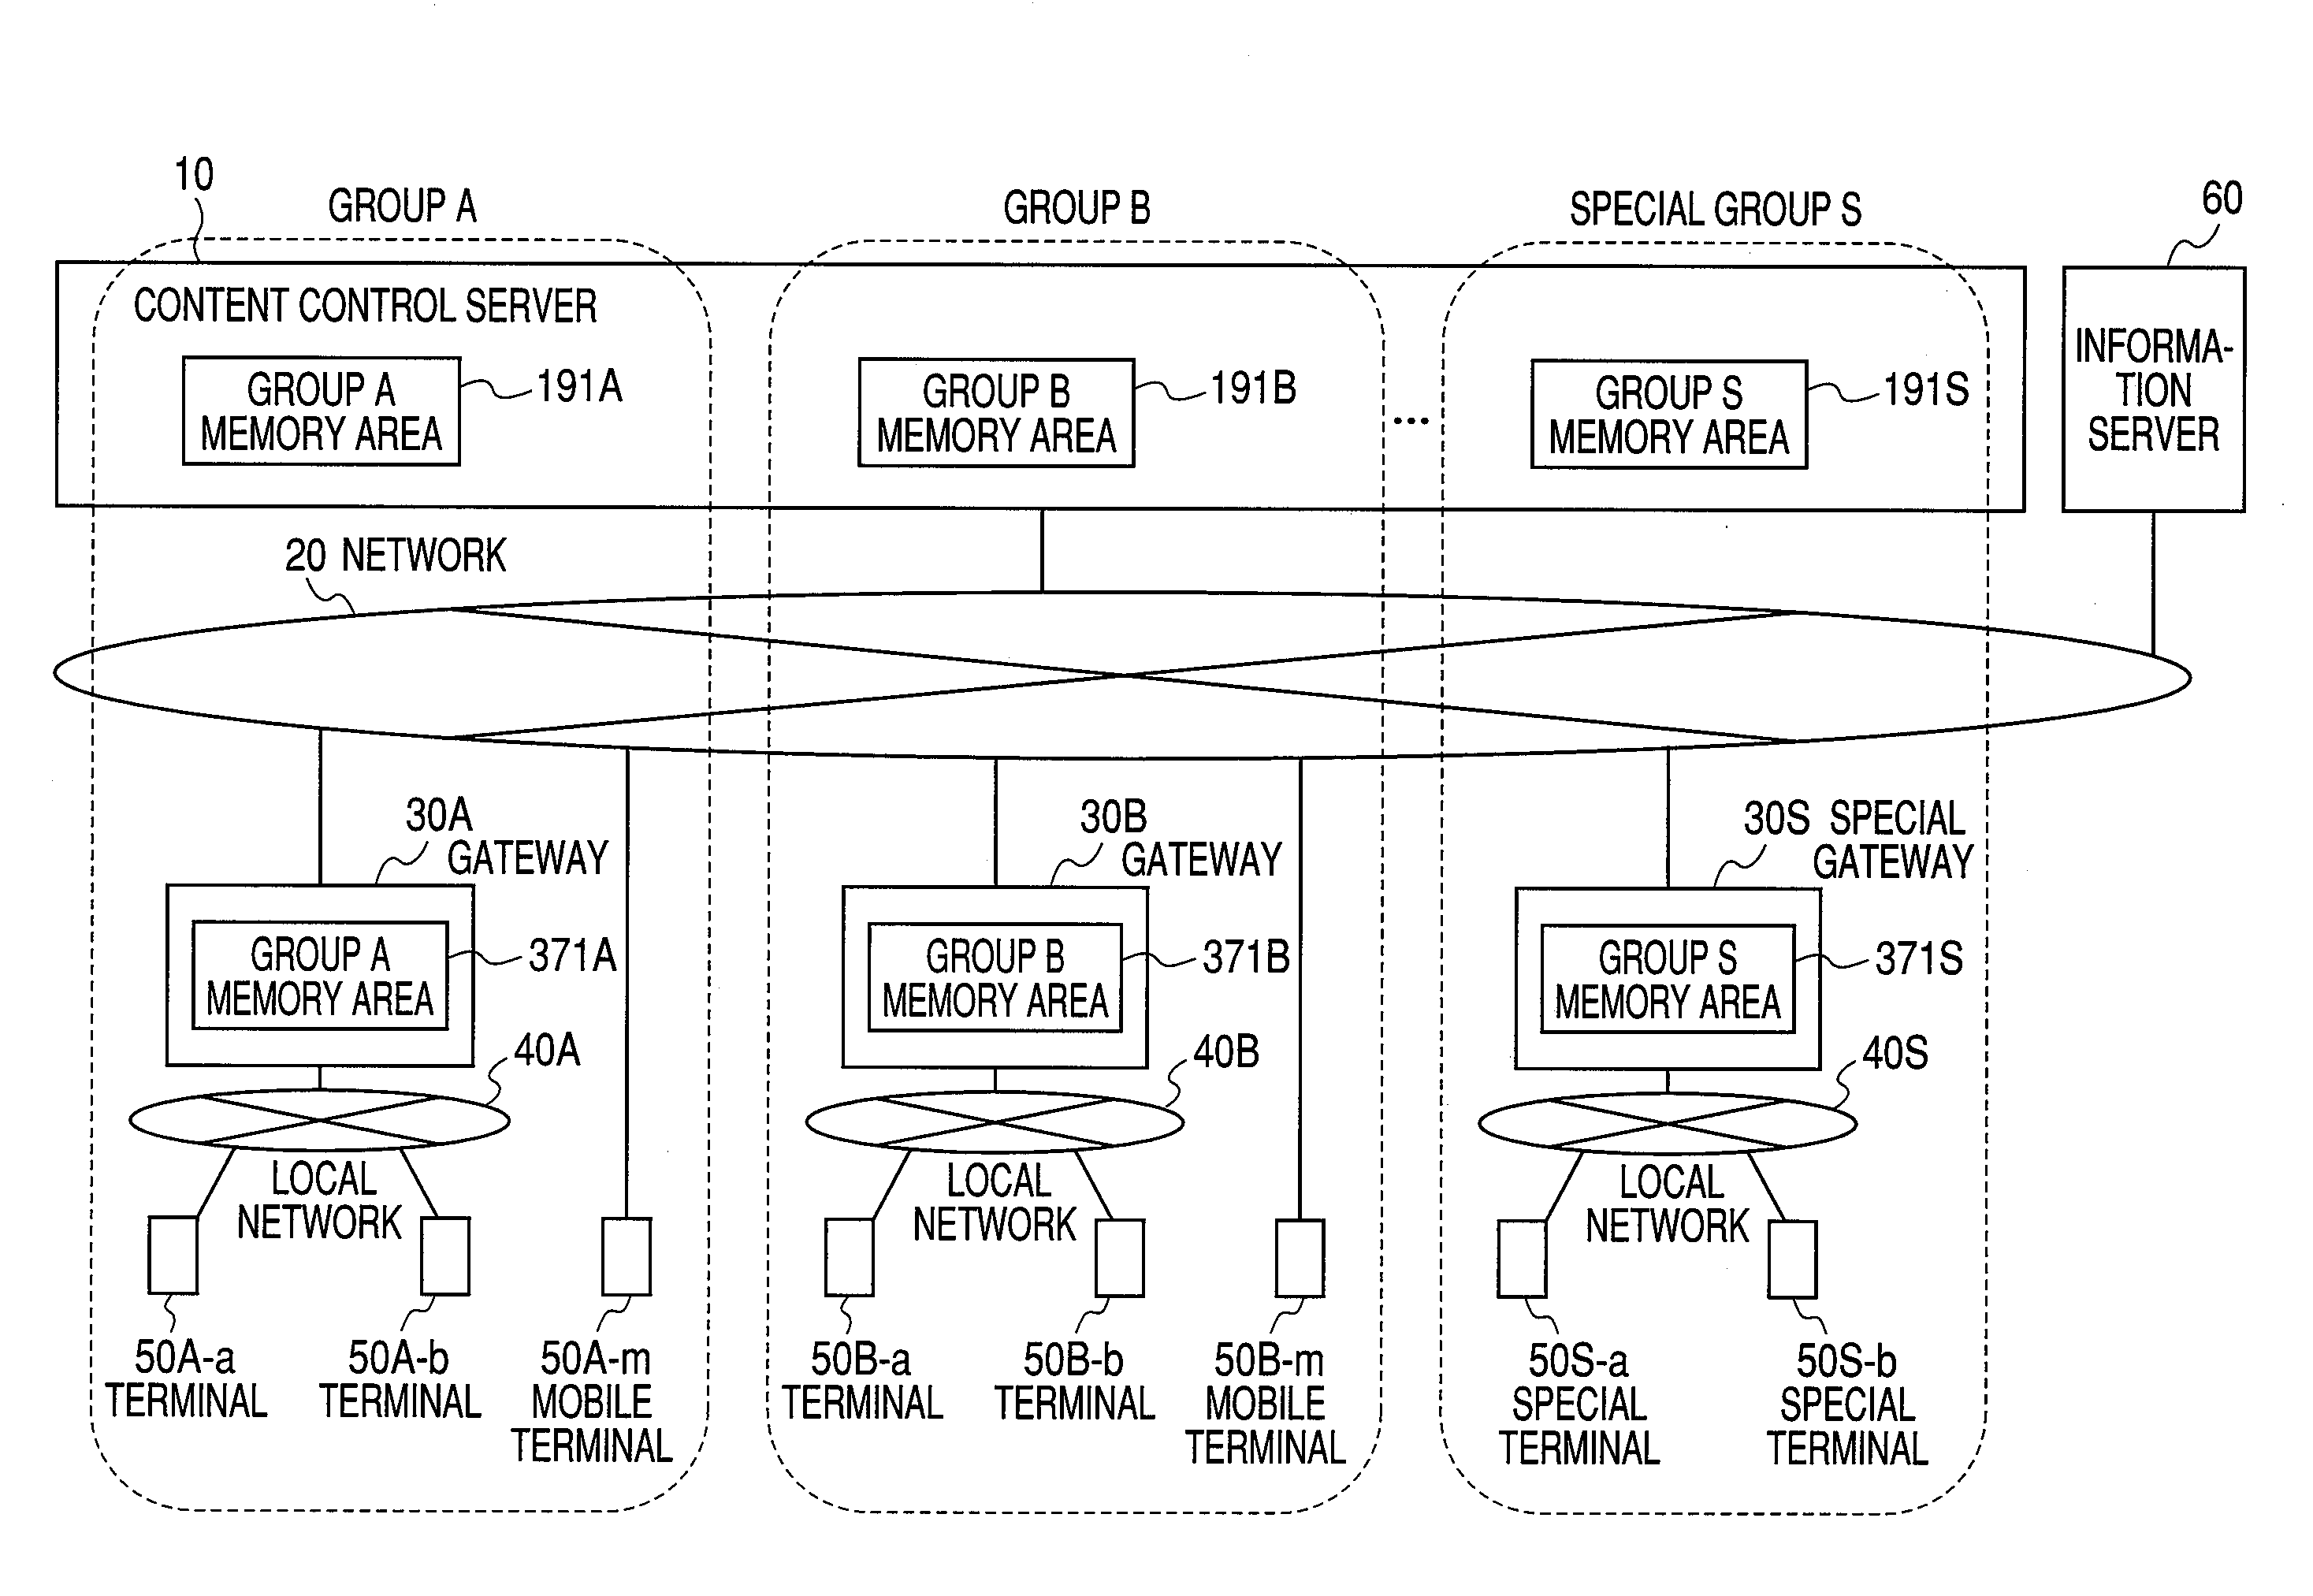 Content control system